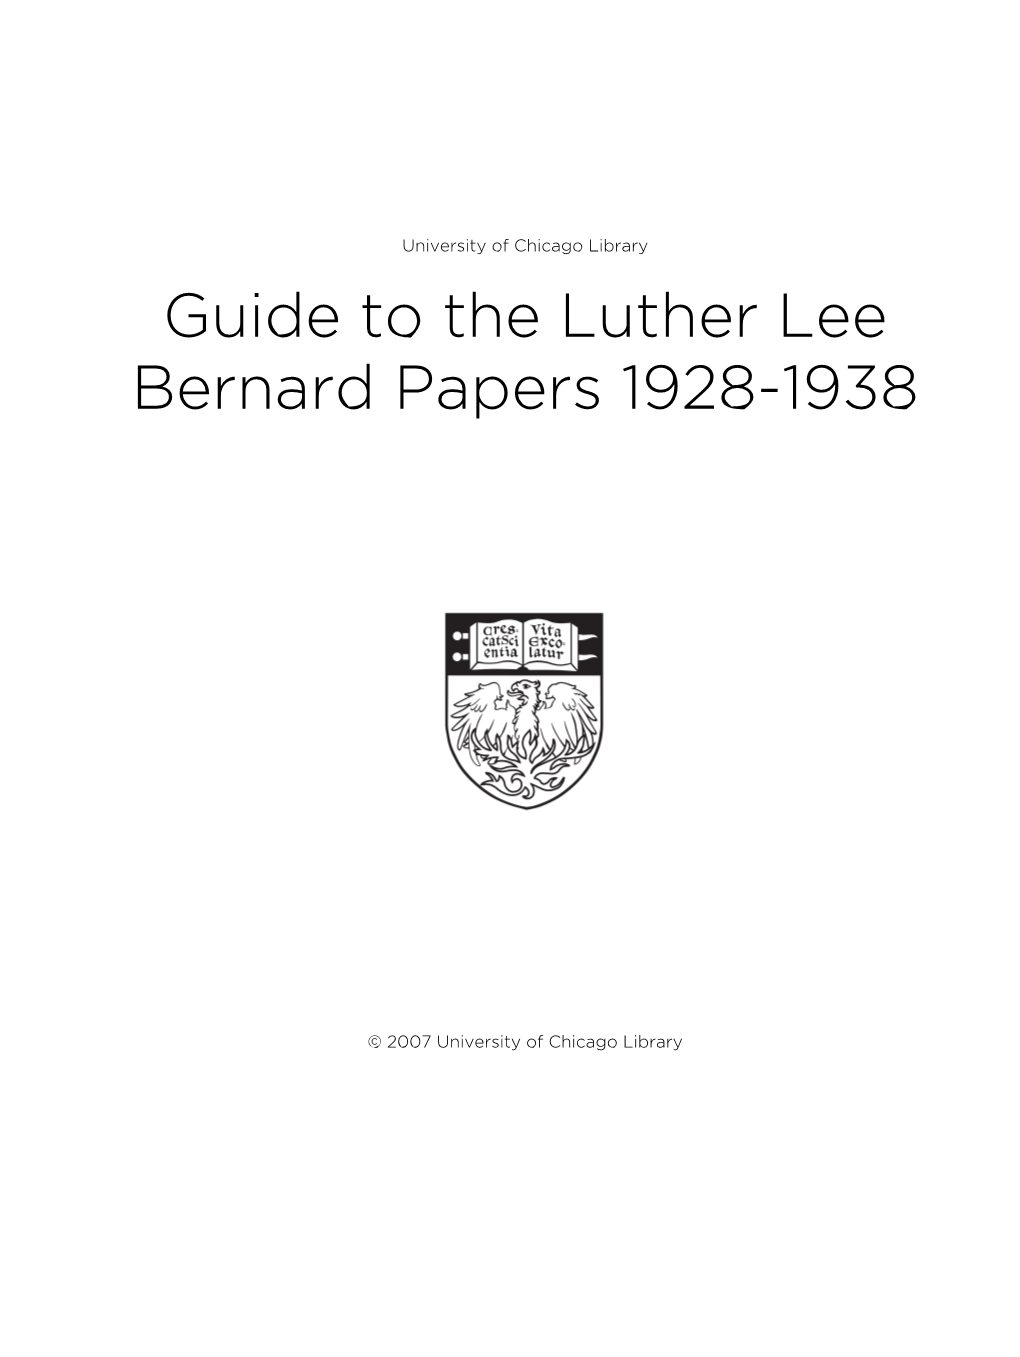 Guide to the Luther Lee Bernard Papers 1928-1938